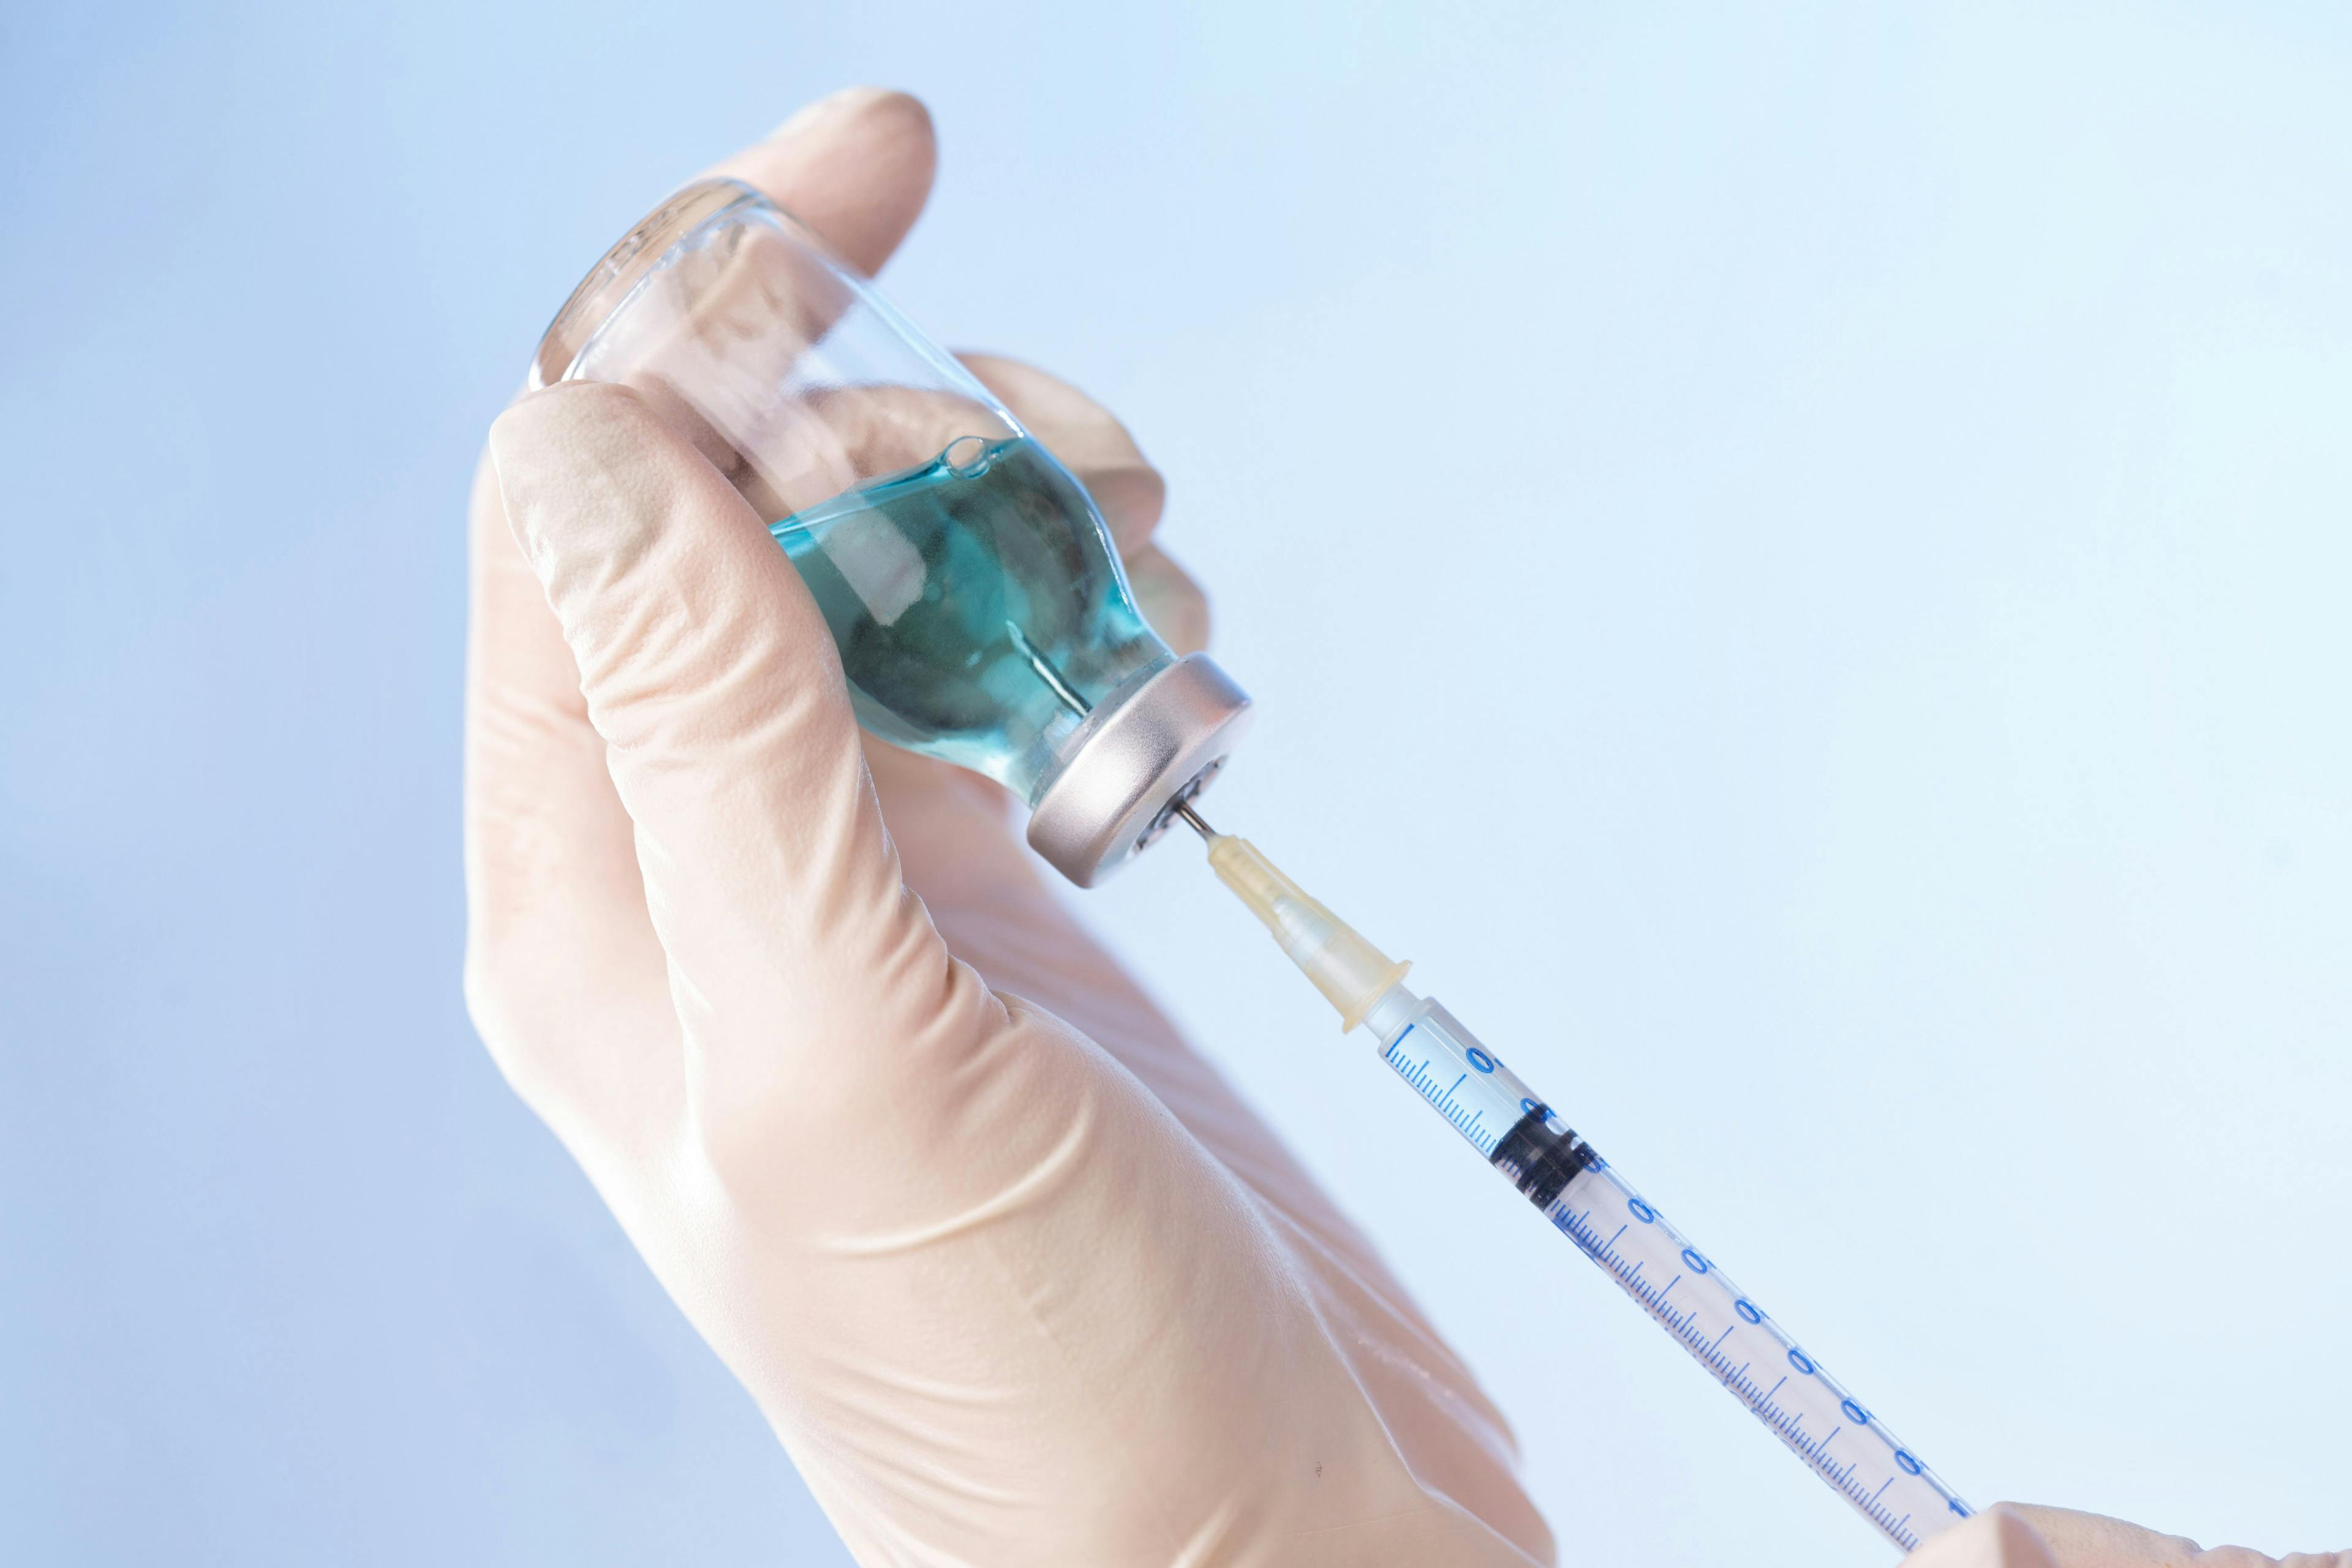 J&J: Real-World Data Demonstrates Durability of Its COVID-19 Vaccine